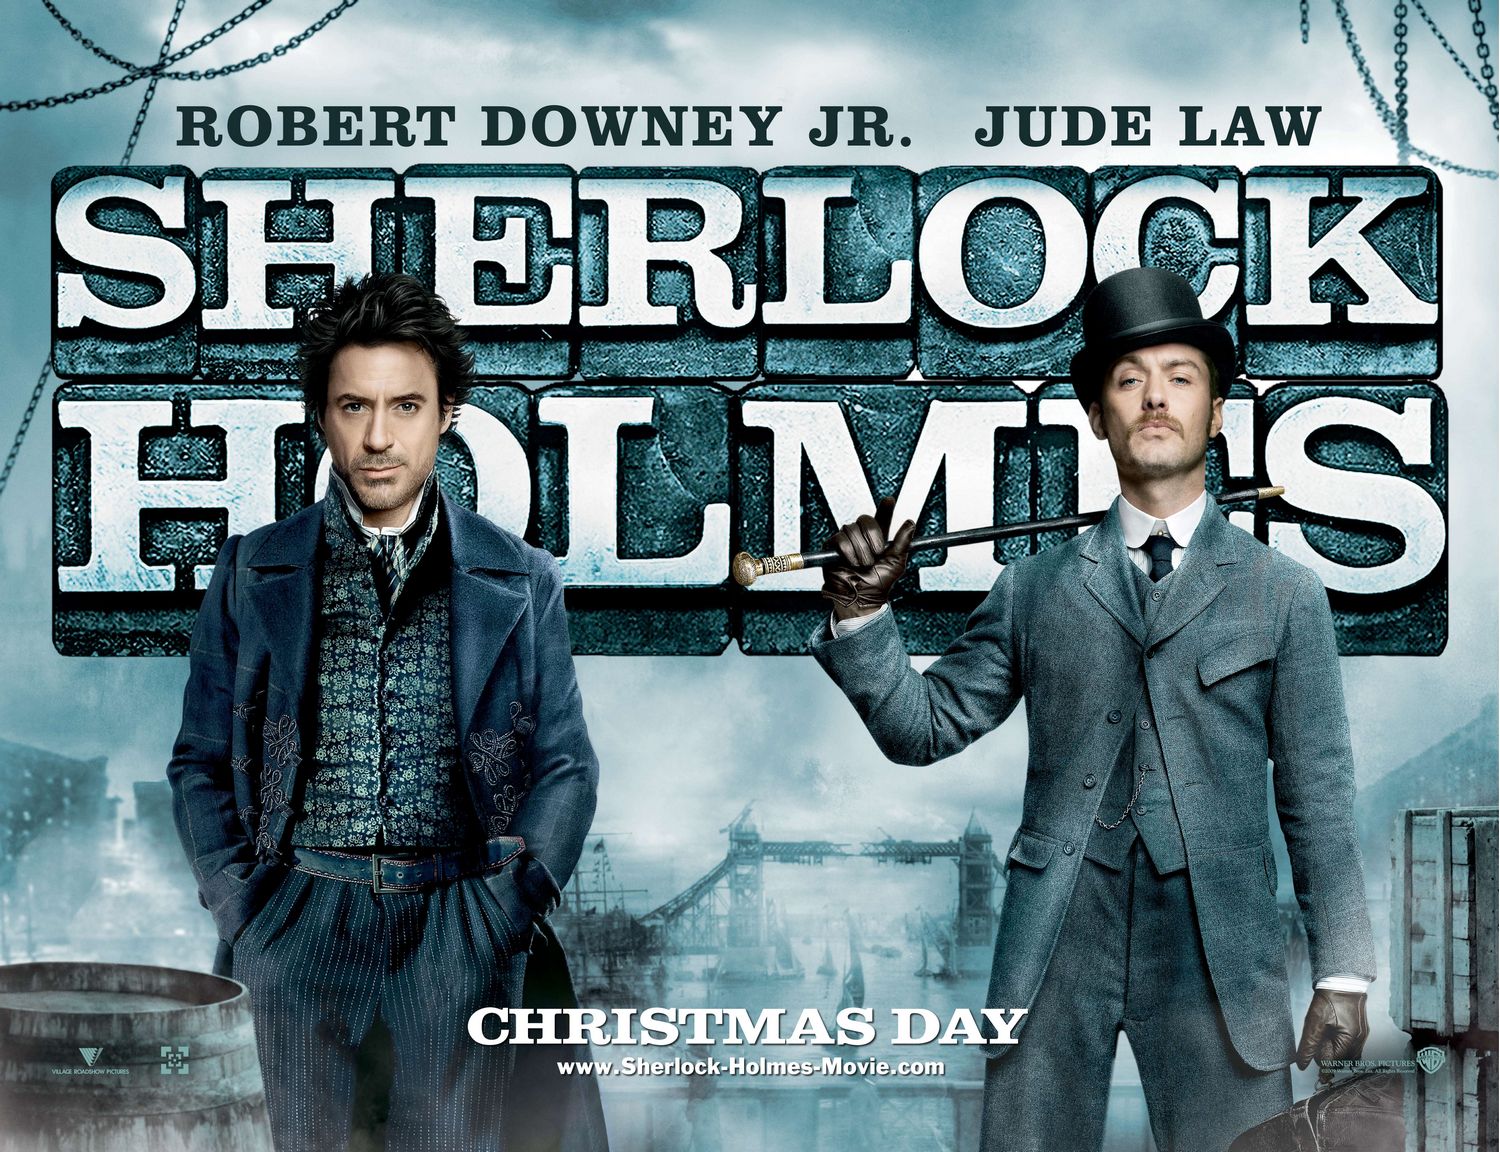 Extra Large Movie Poster Image for Sherlock Holmes (#15 of 16)